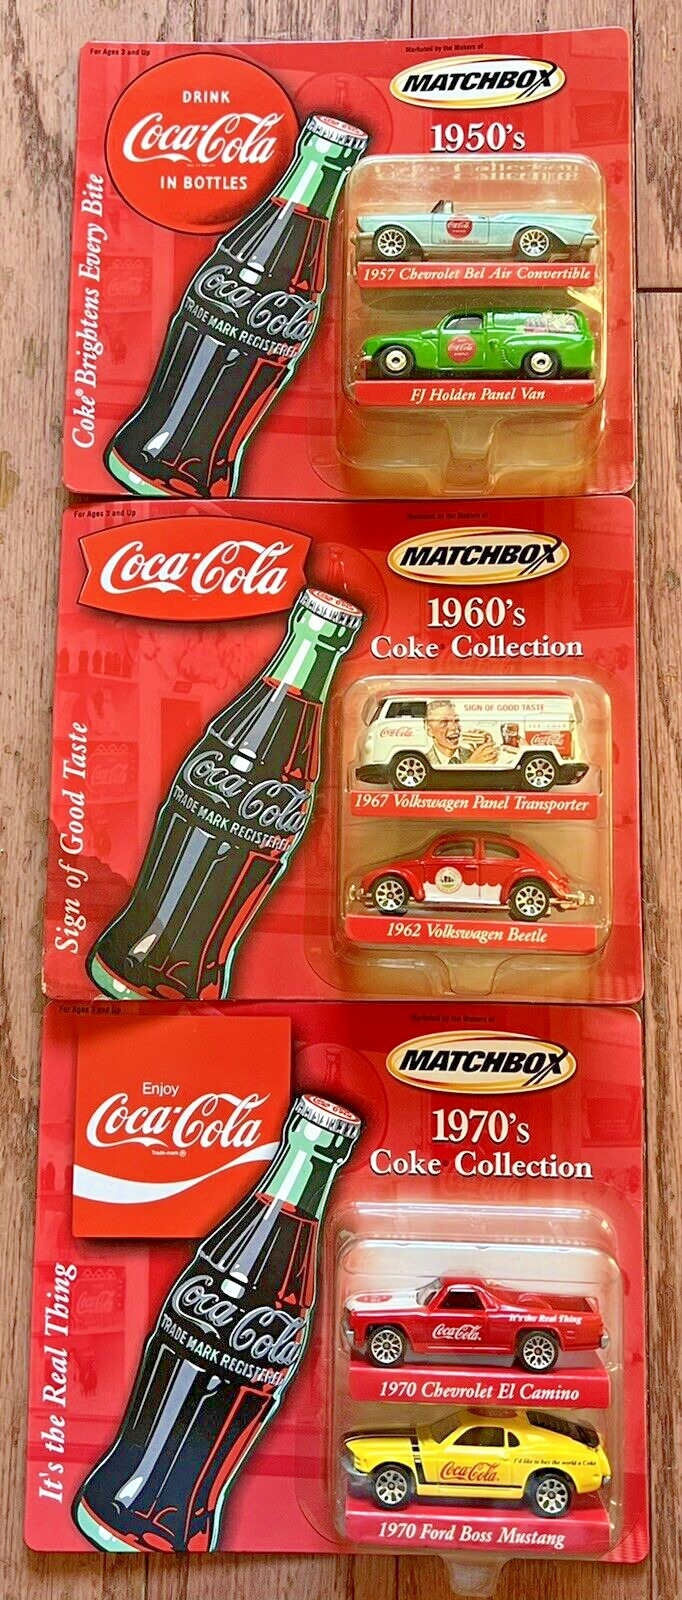 New SEALED 2001 Matchbox Coca Cola 1950 1960 1970 Coke Collection Chevy VW Ford